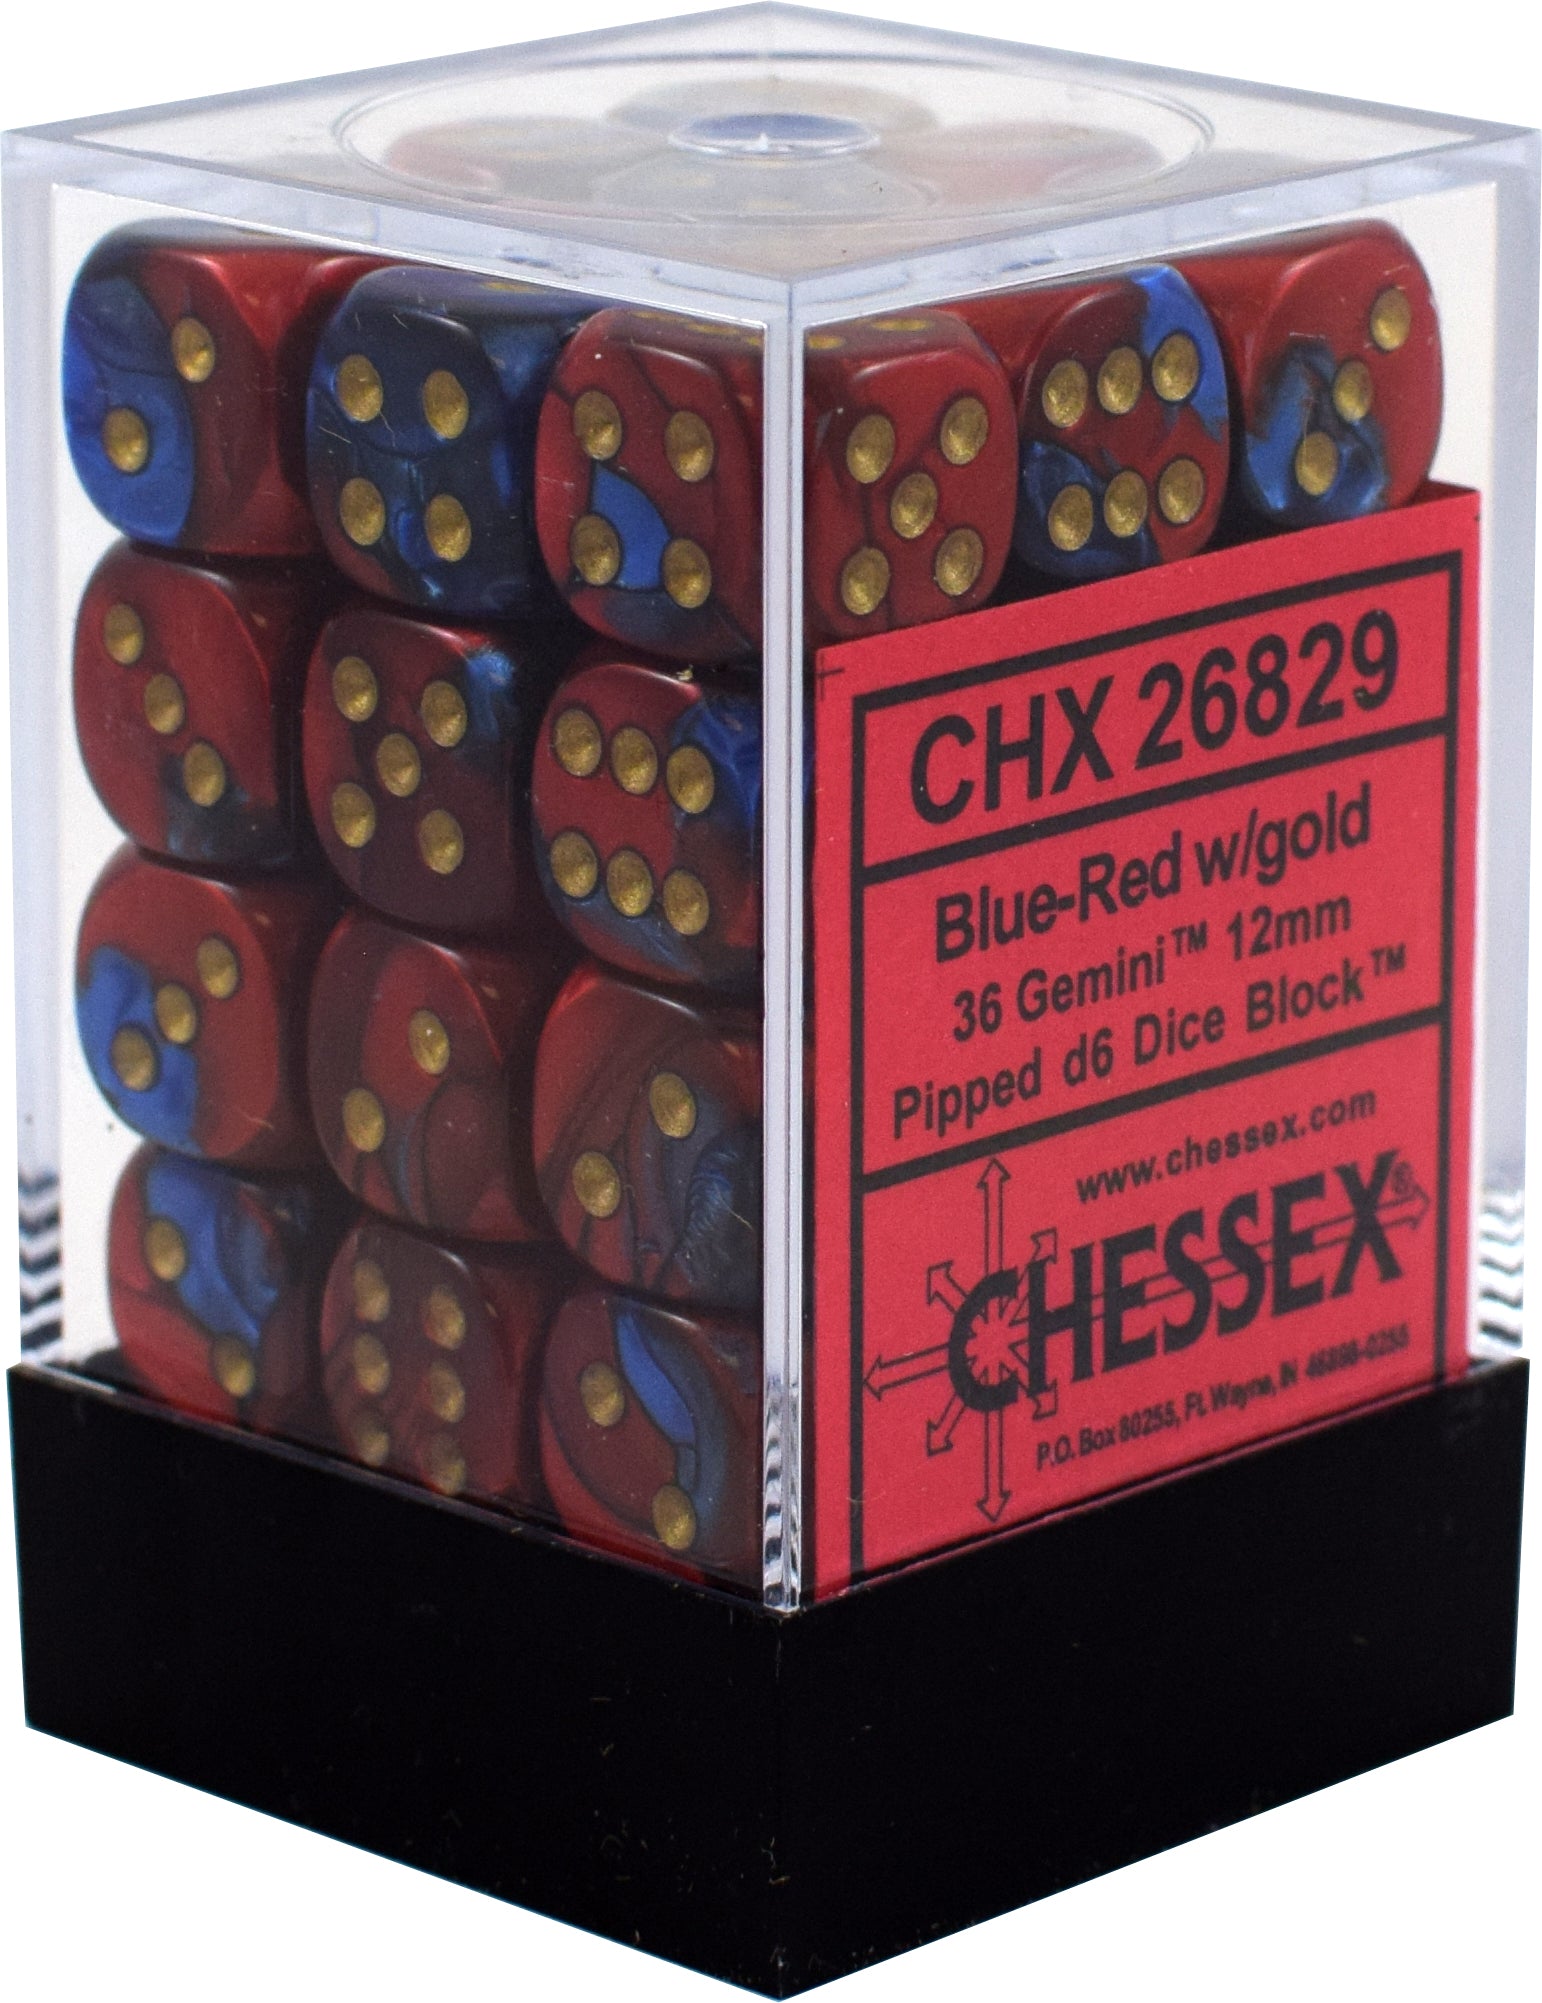 36 Blue-red w/gold Gemini 12mm D6 Dice Block - CHX26829 | North of Exile Games